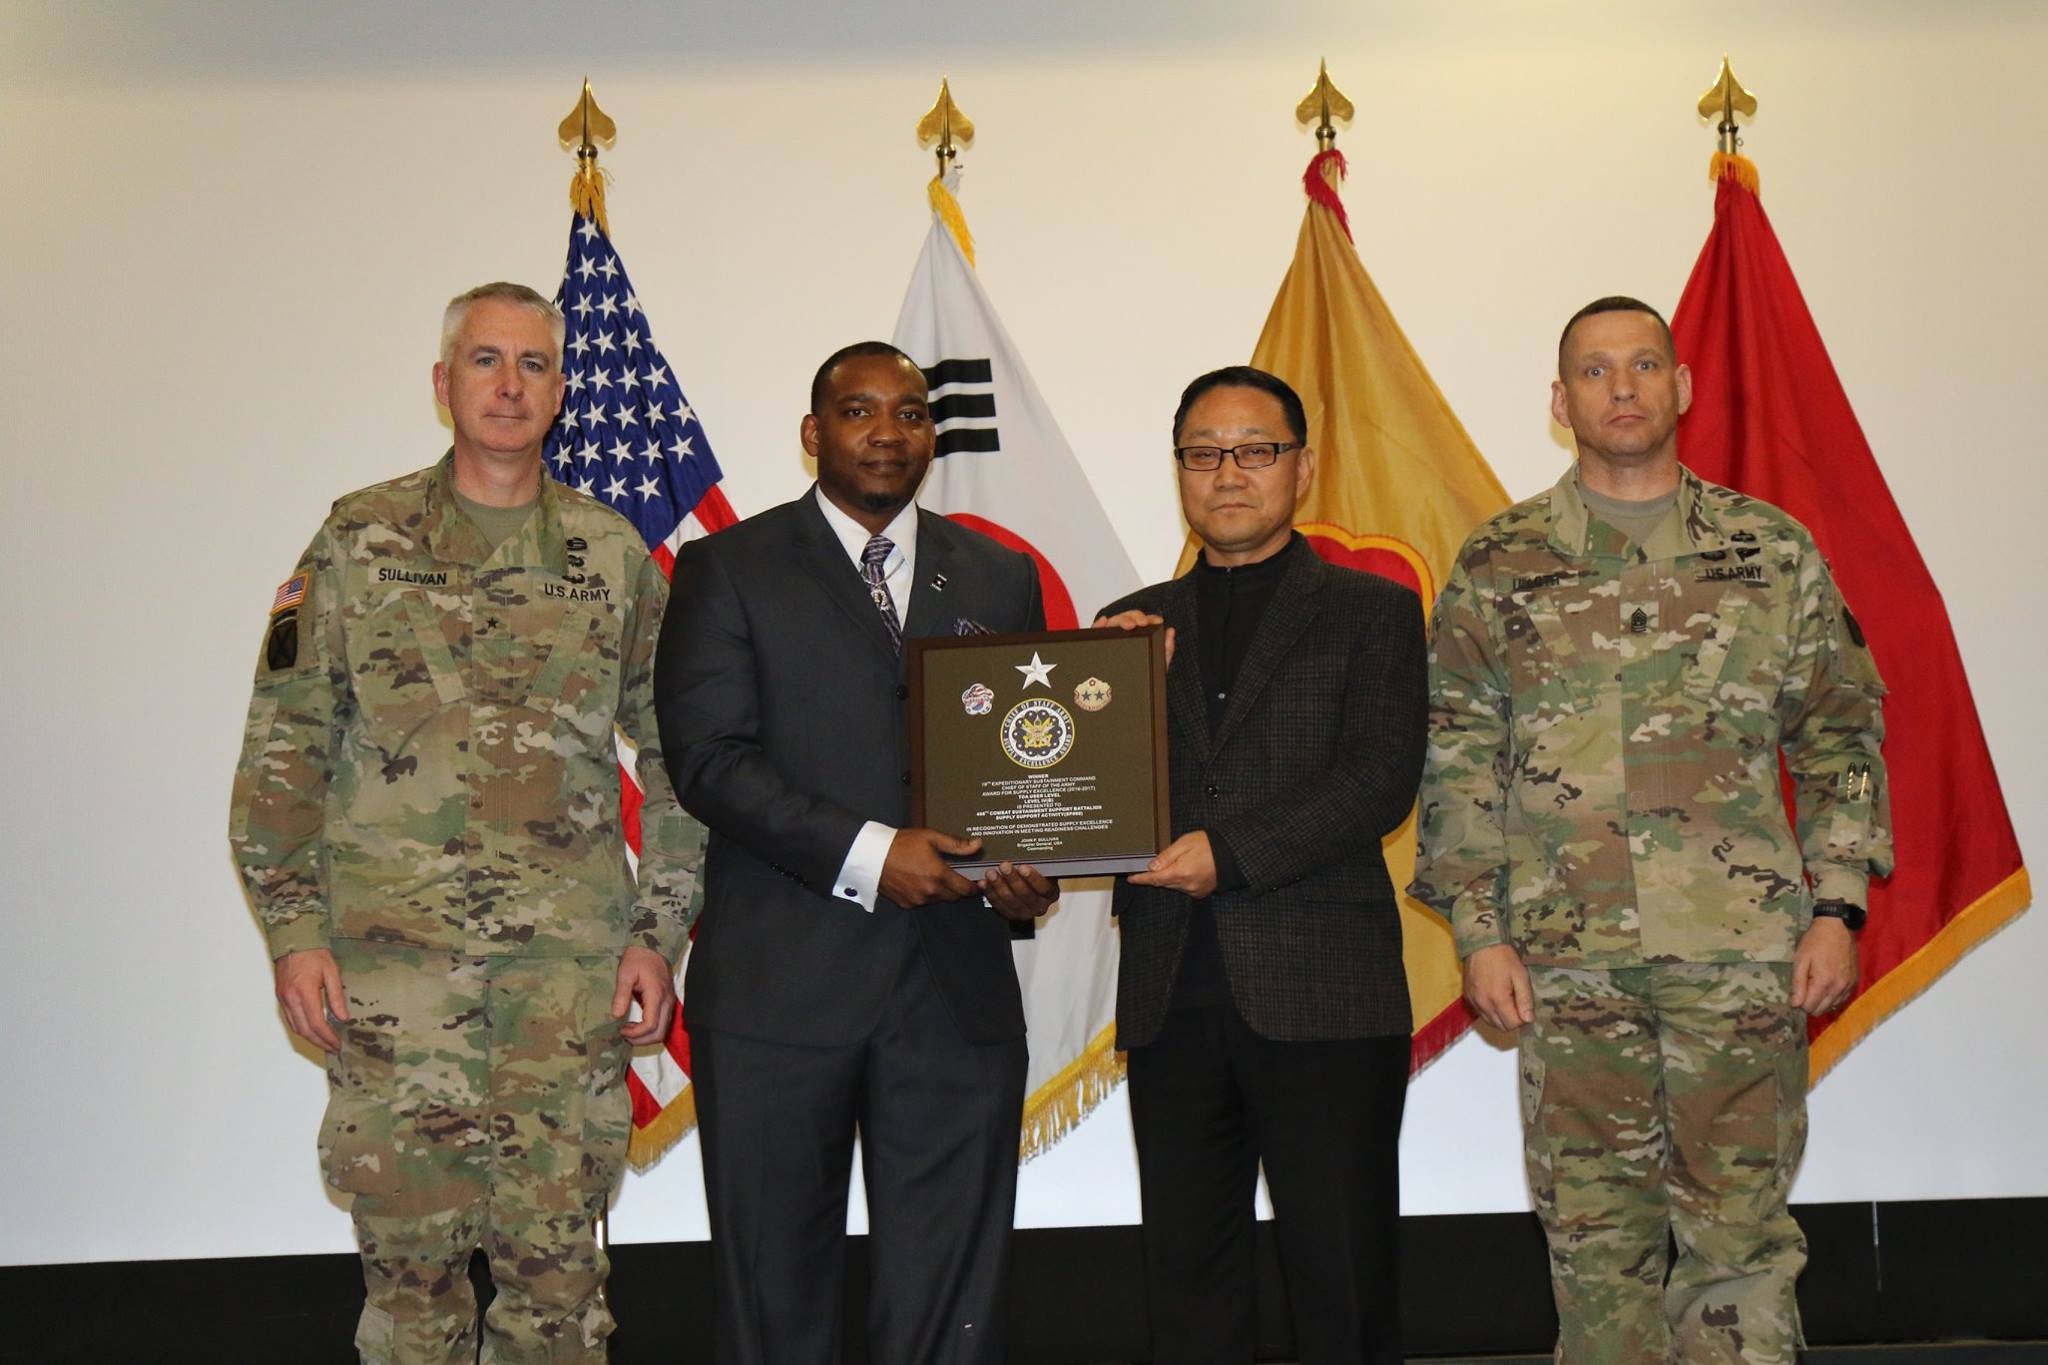 Nopdr Army Award Combined logistics awards ceremony honors U.S. Army